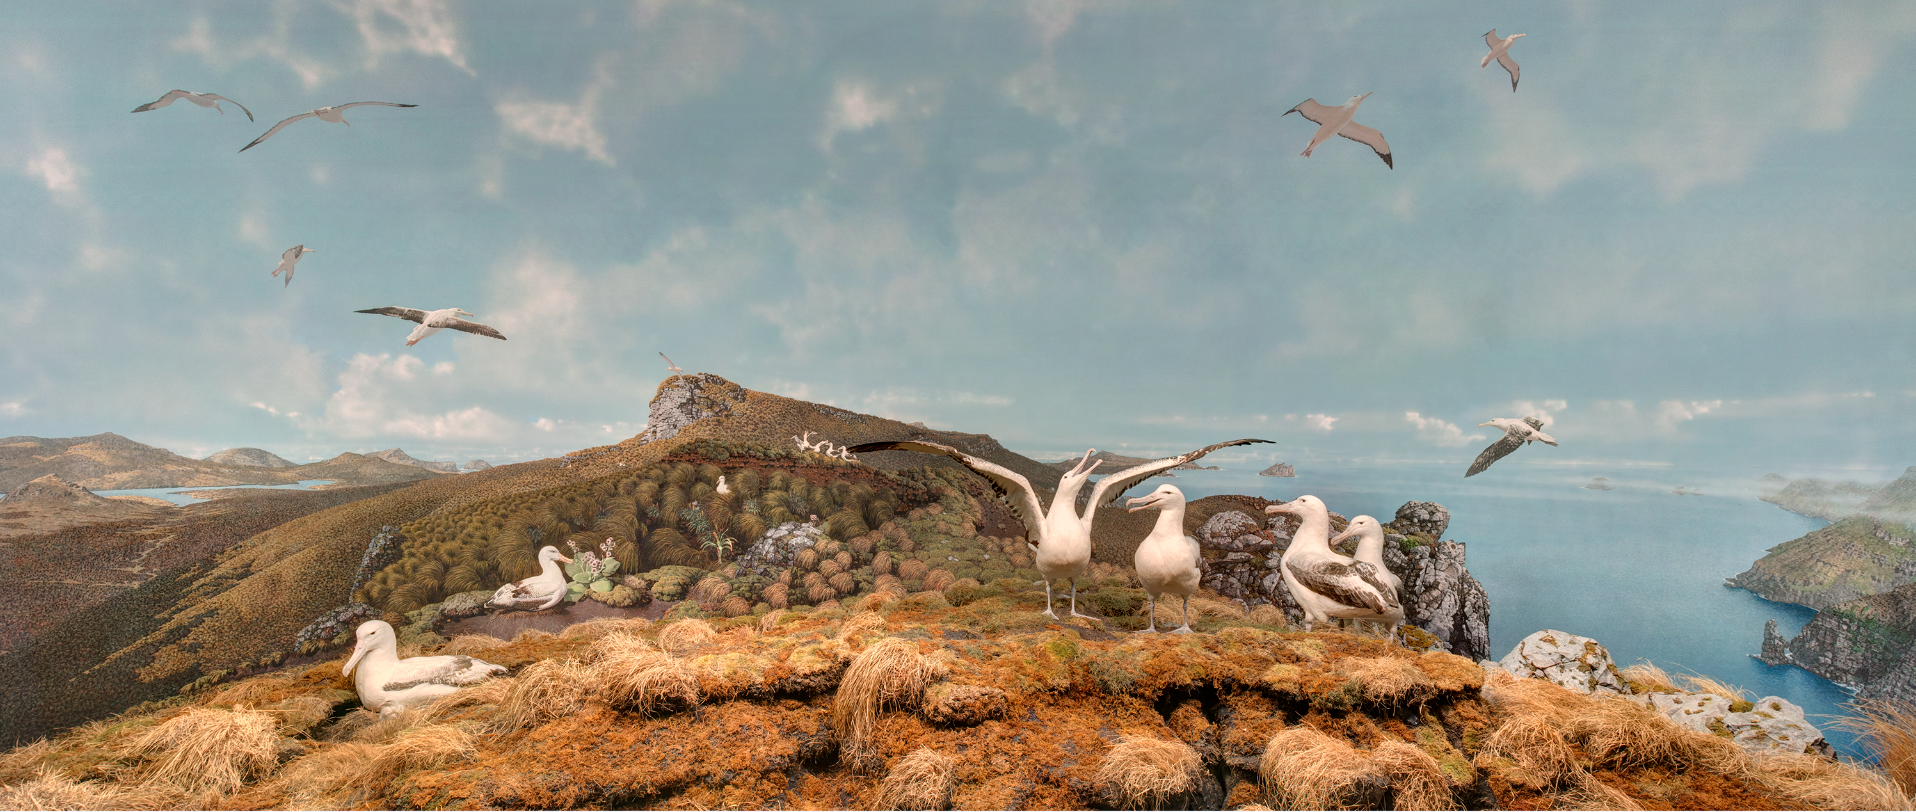 Bird Diorama at Denver Museum of Nature and Science